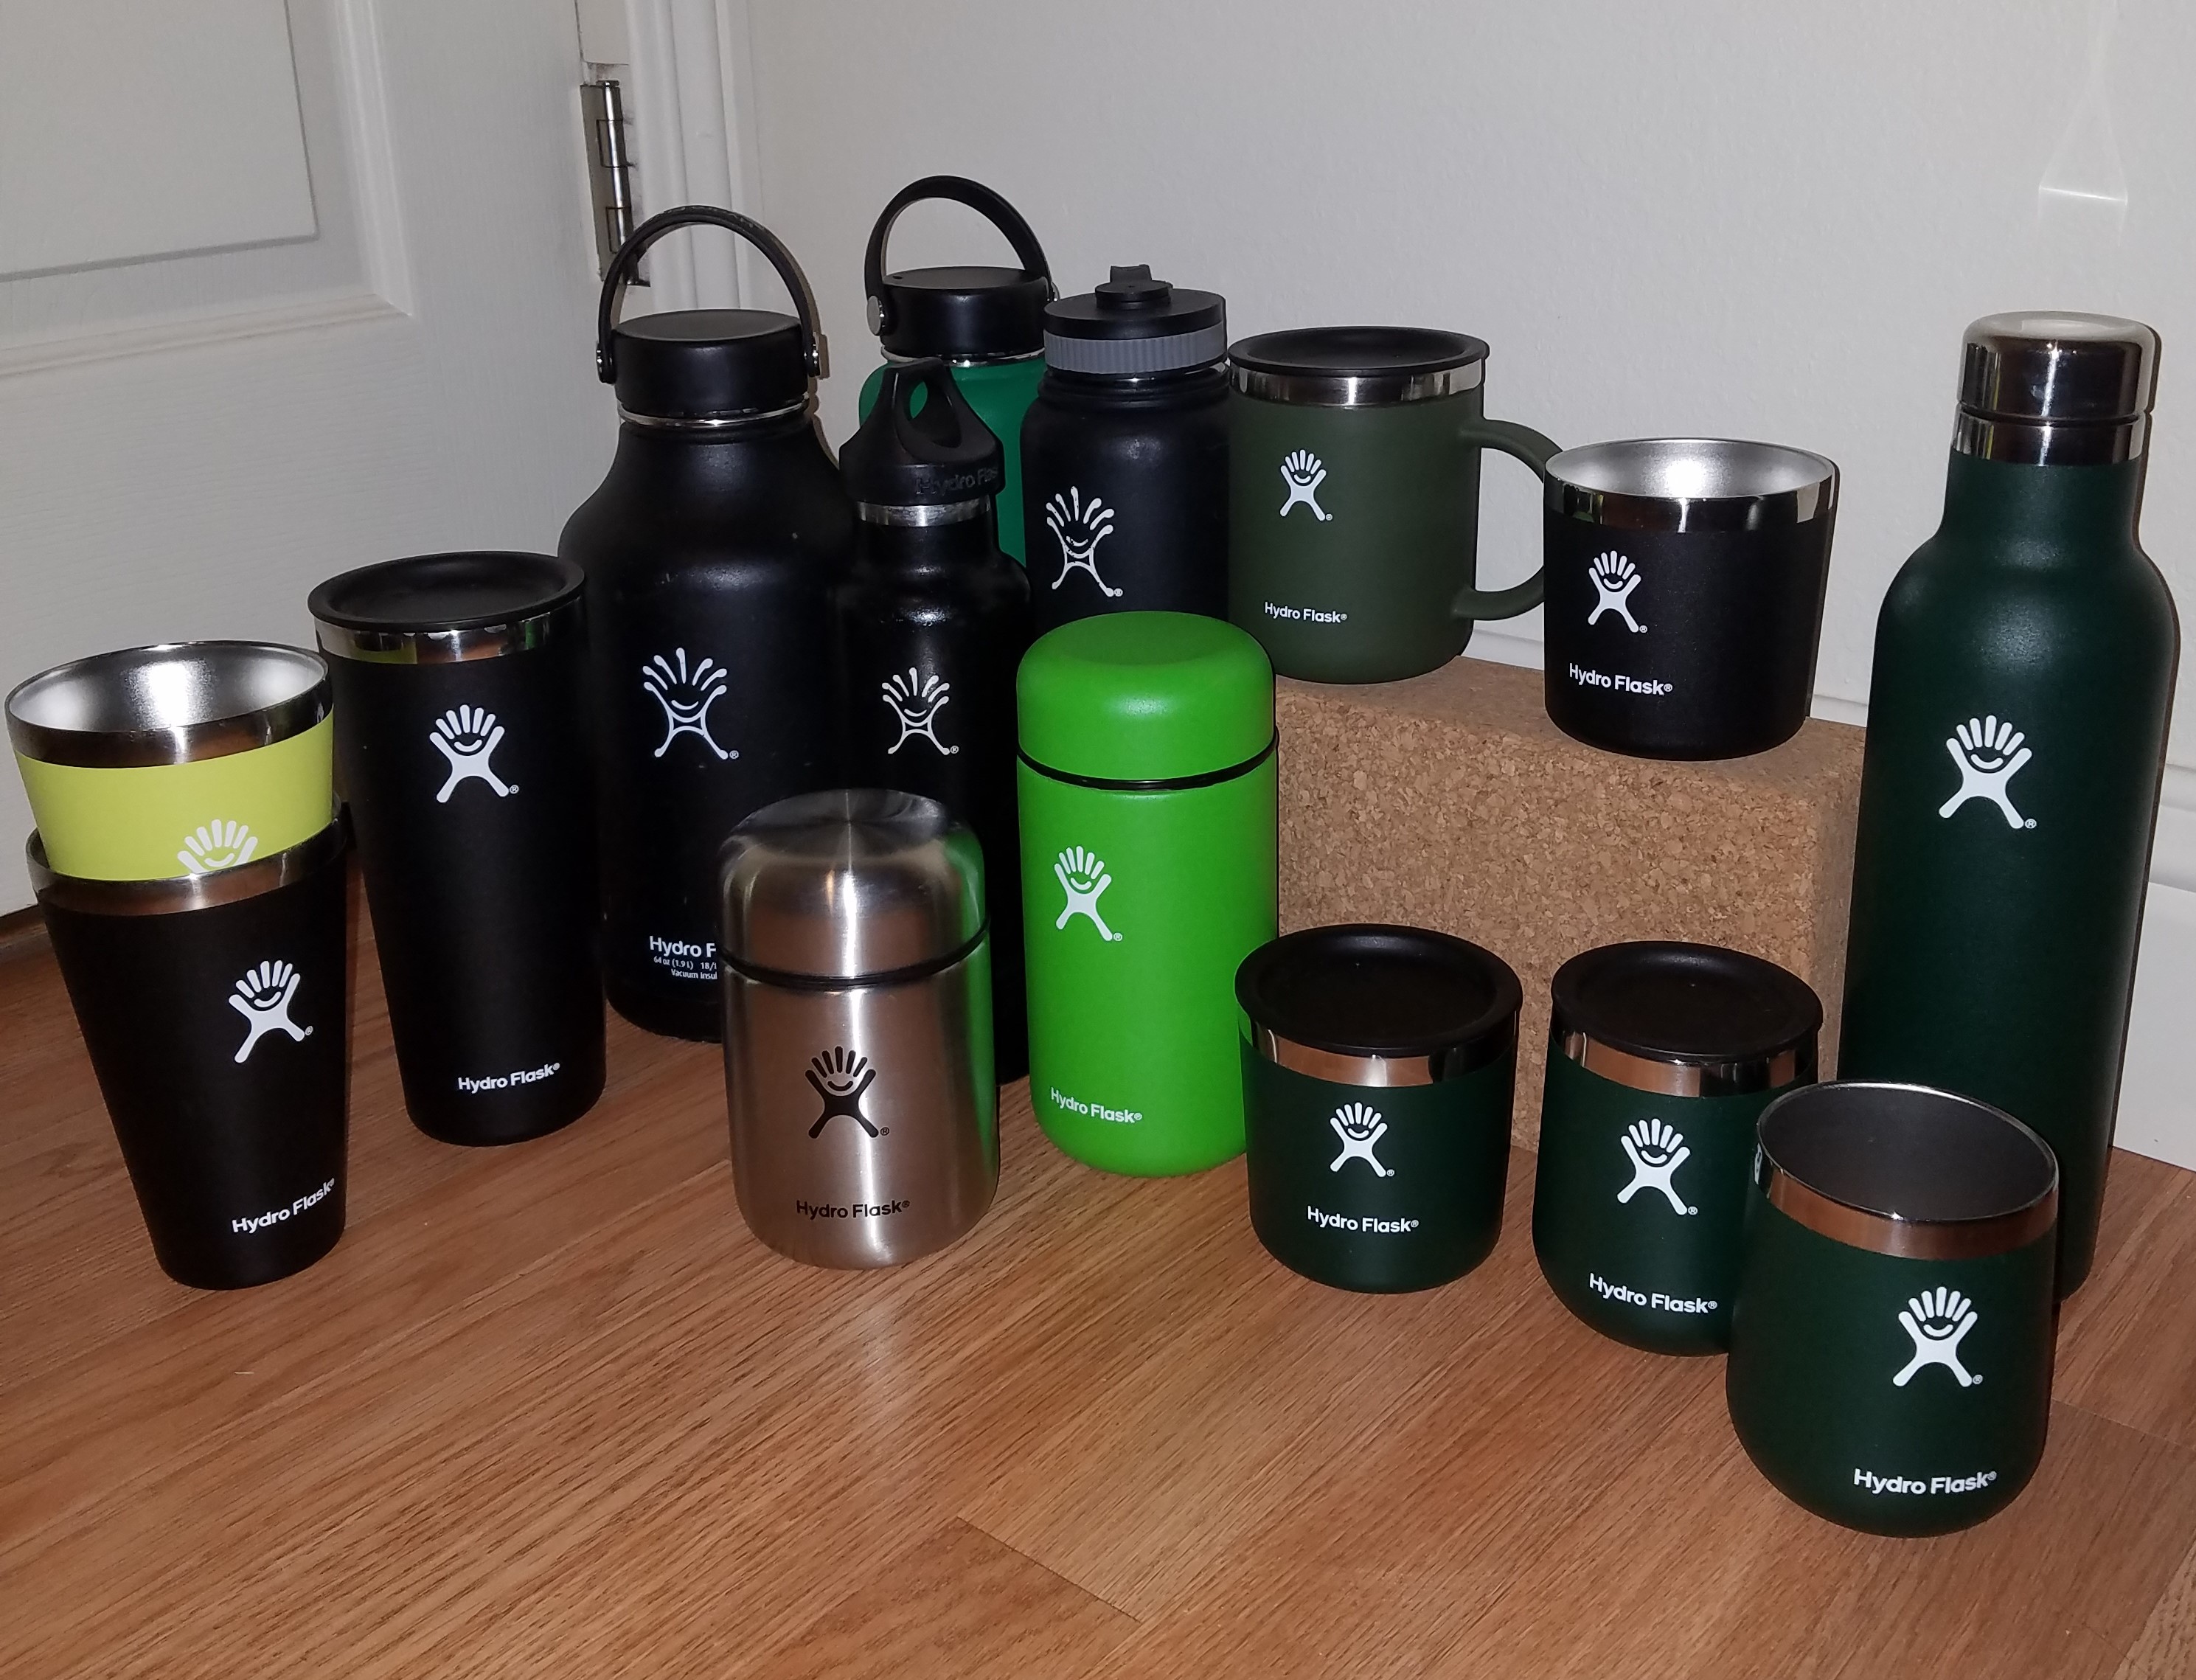 All the Hydro Flasks that I own, there are 15 items shown in this image